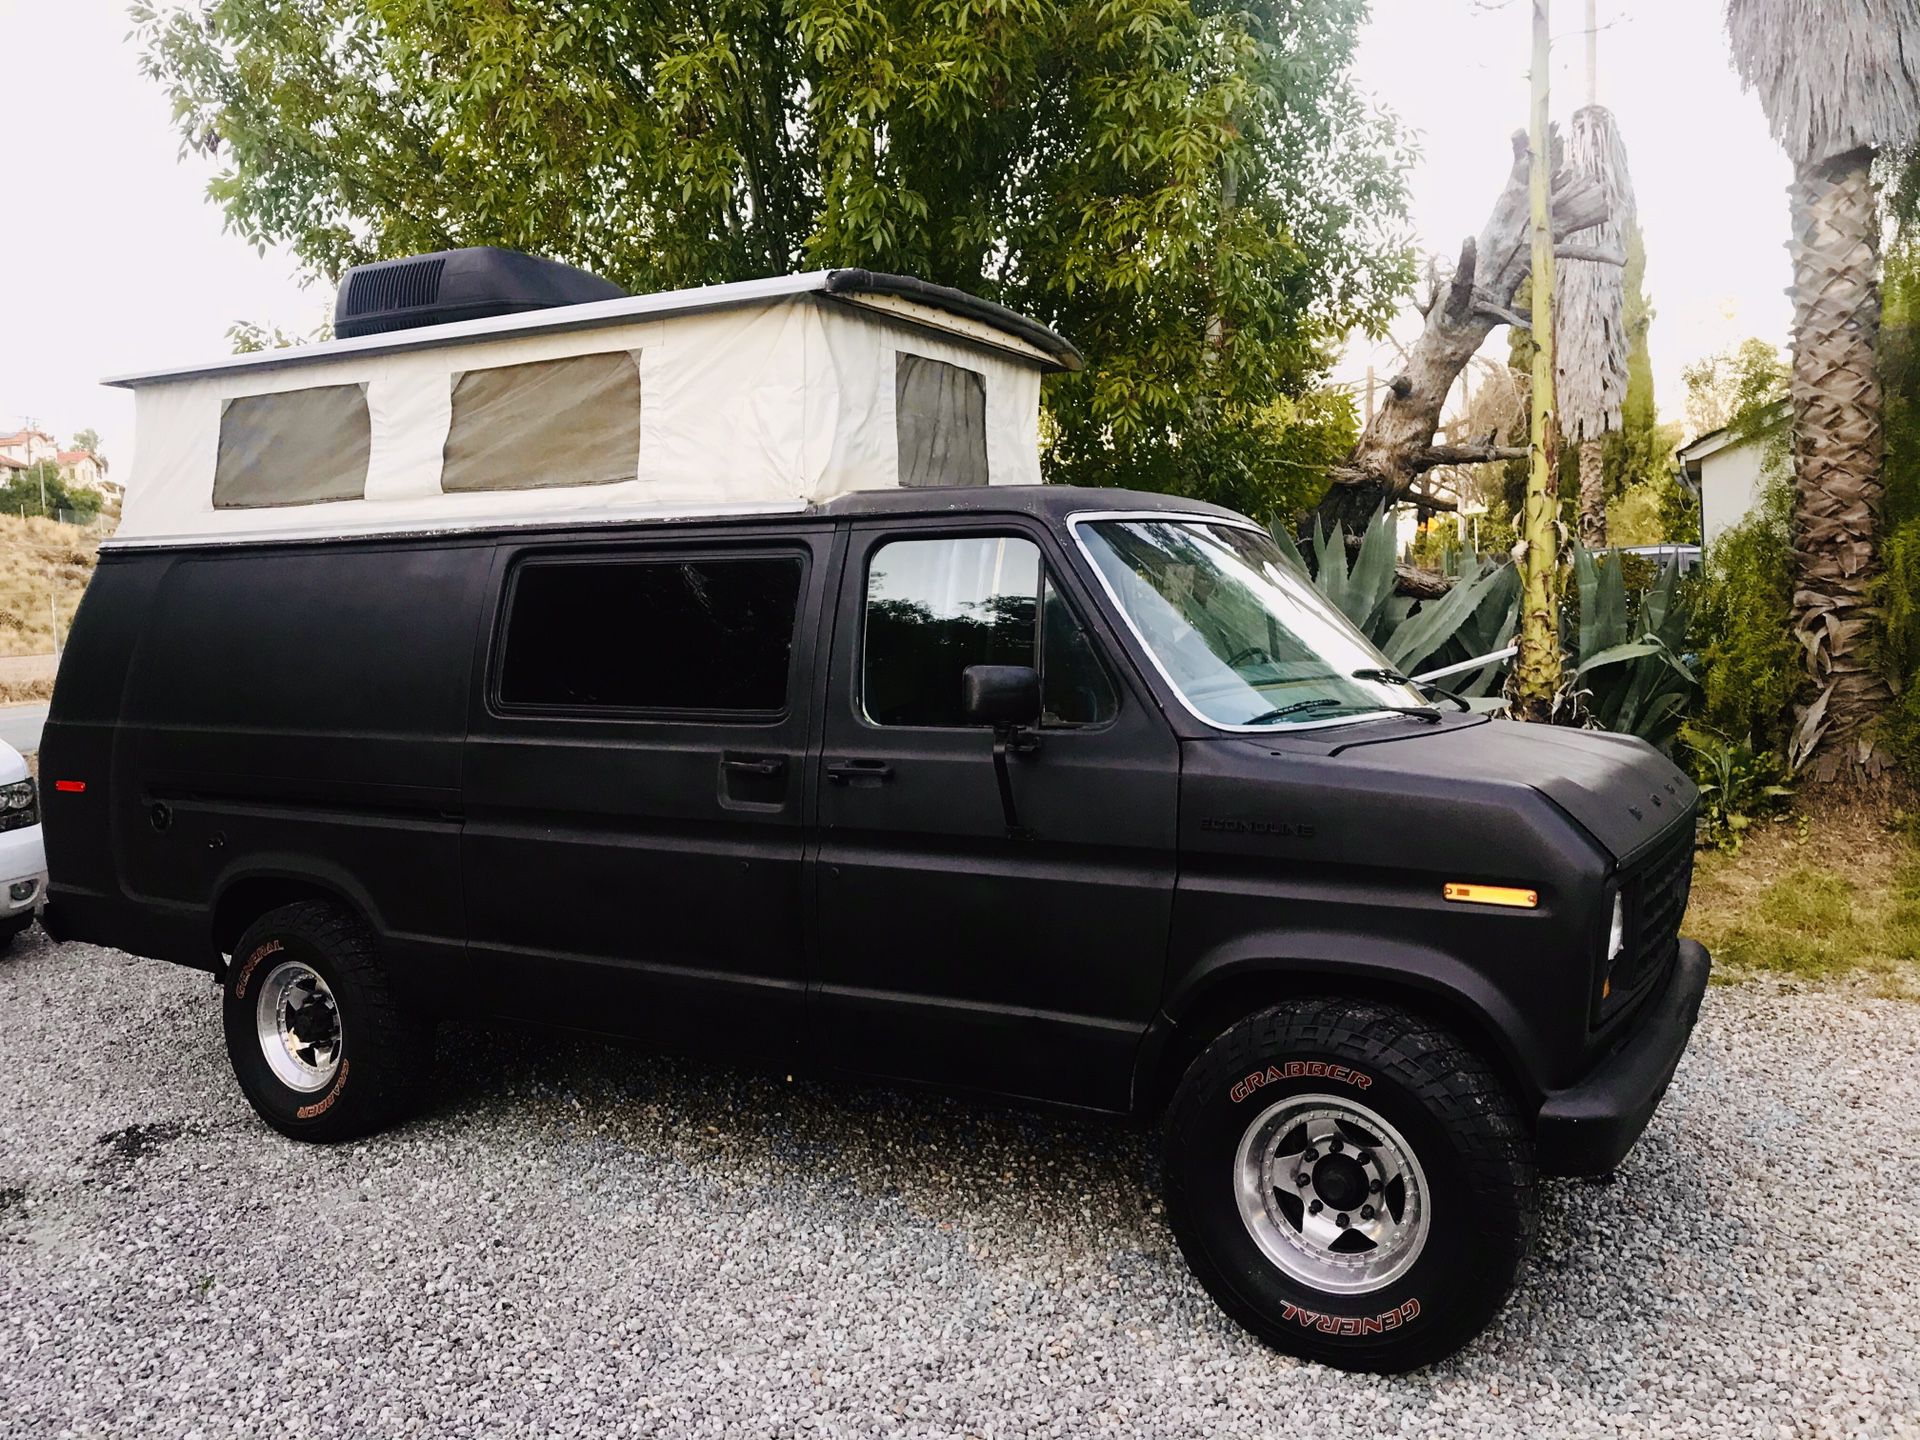 Ford camper rv needs to move taking up space starts up but has Electrical issue